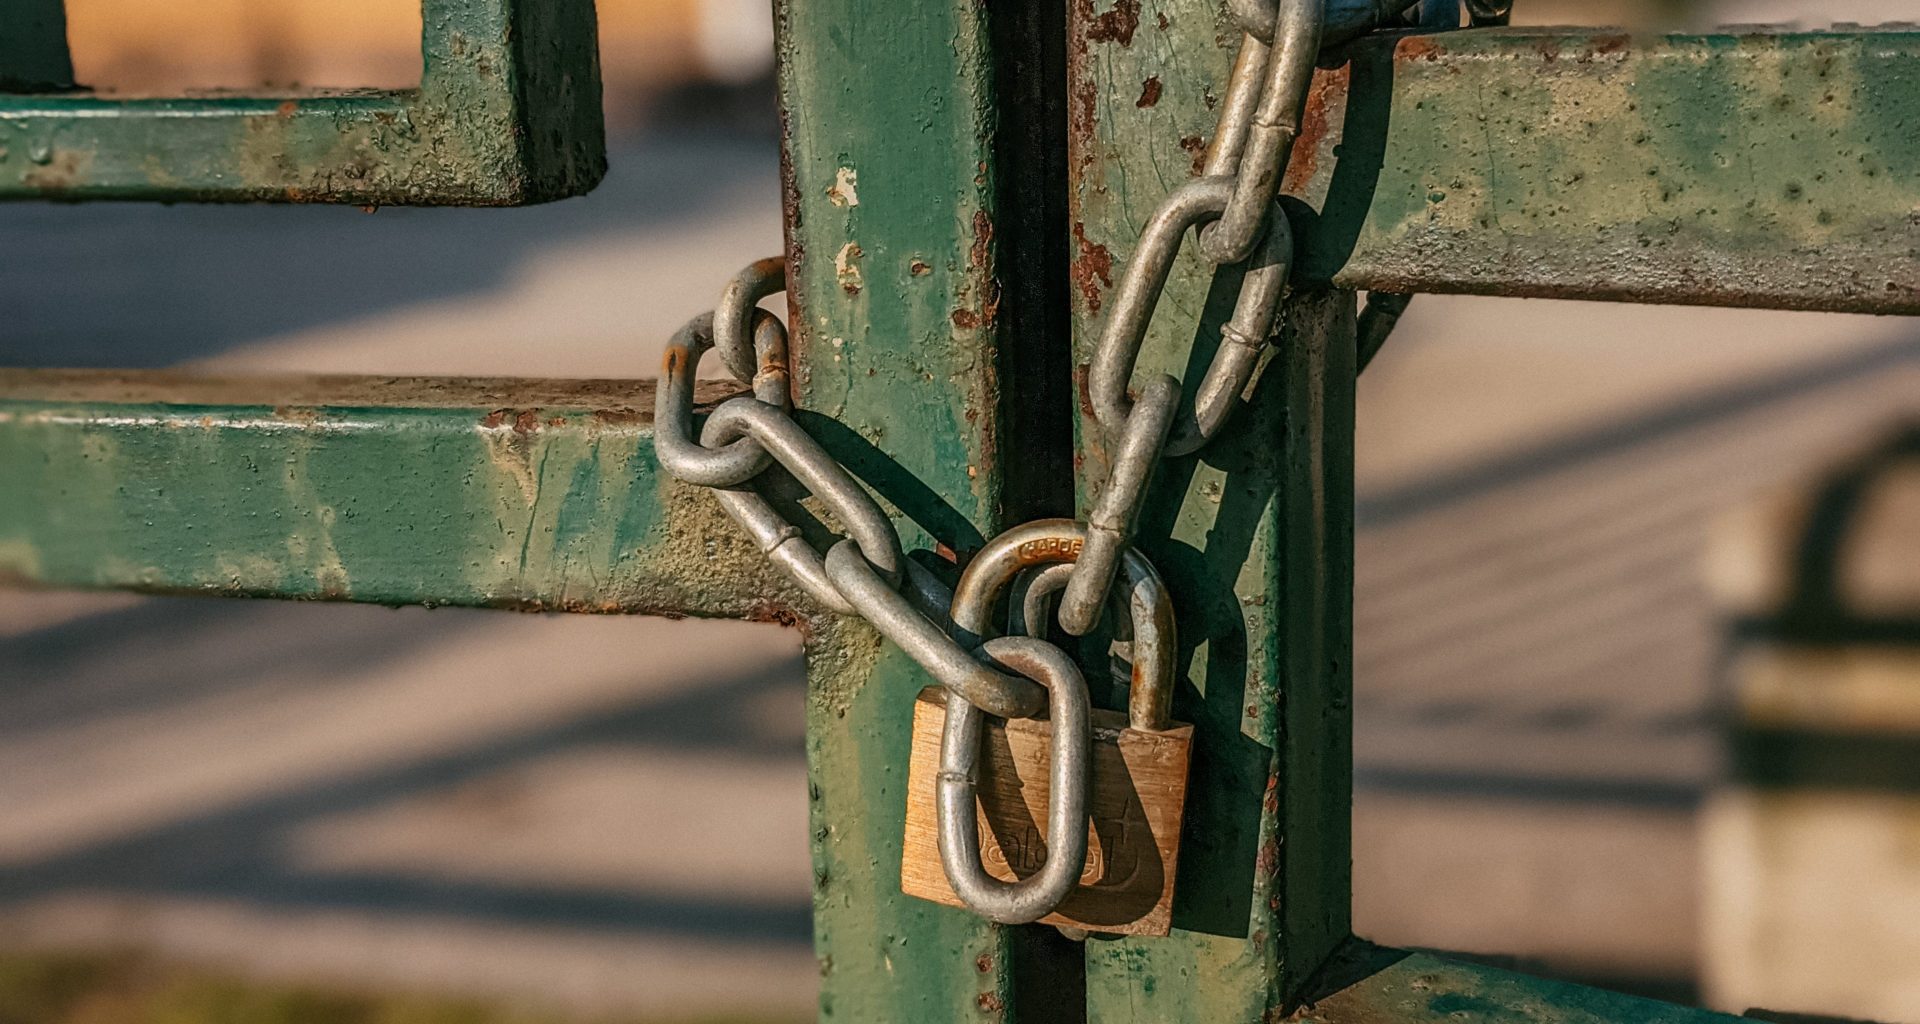 Locked gates and keep out signs: hundreds of access issues logged by councils 4